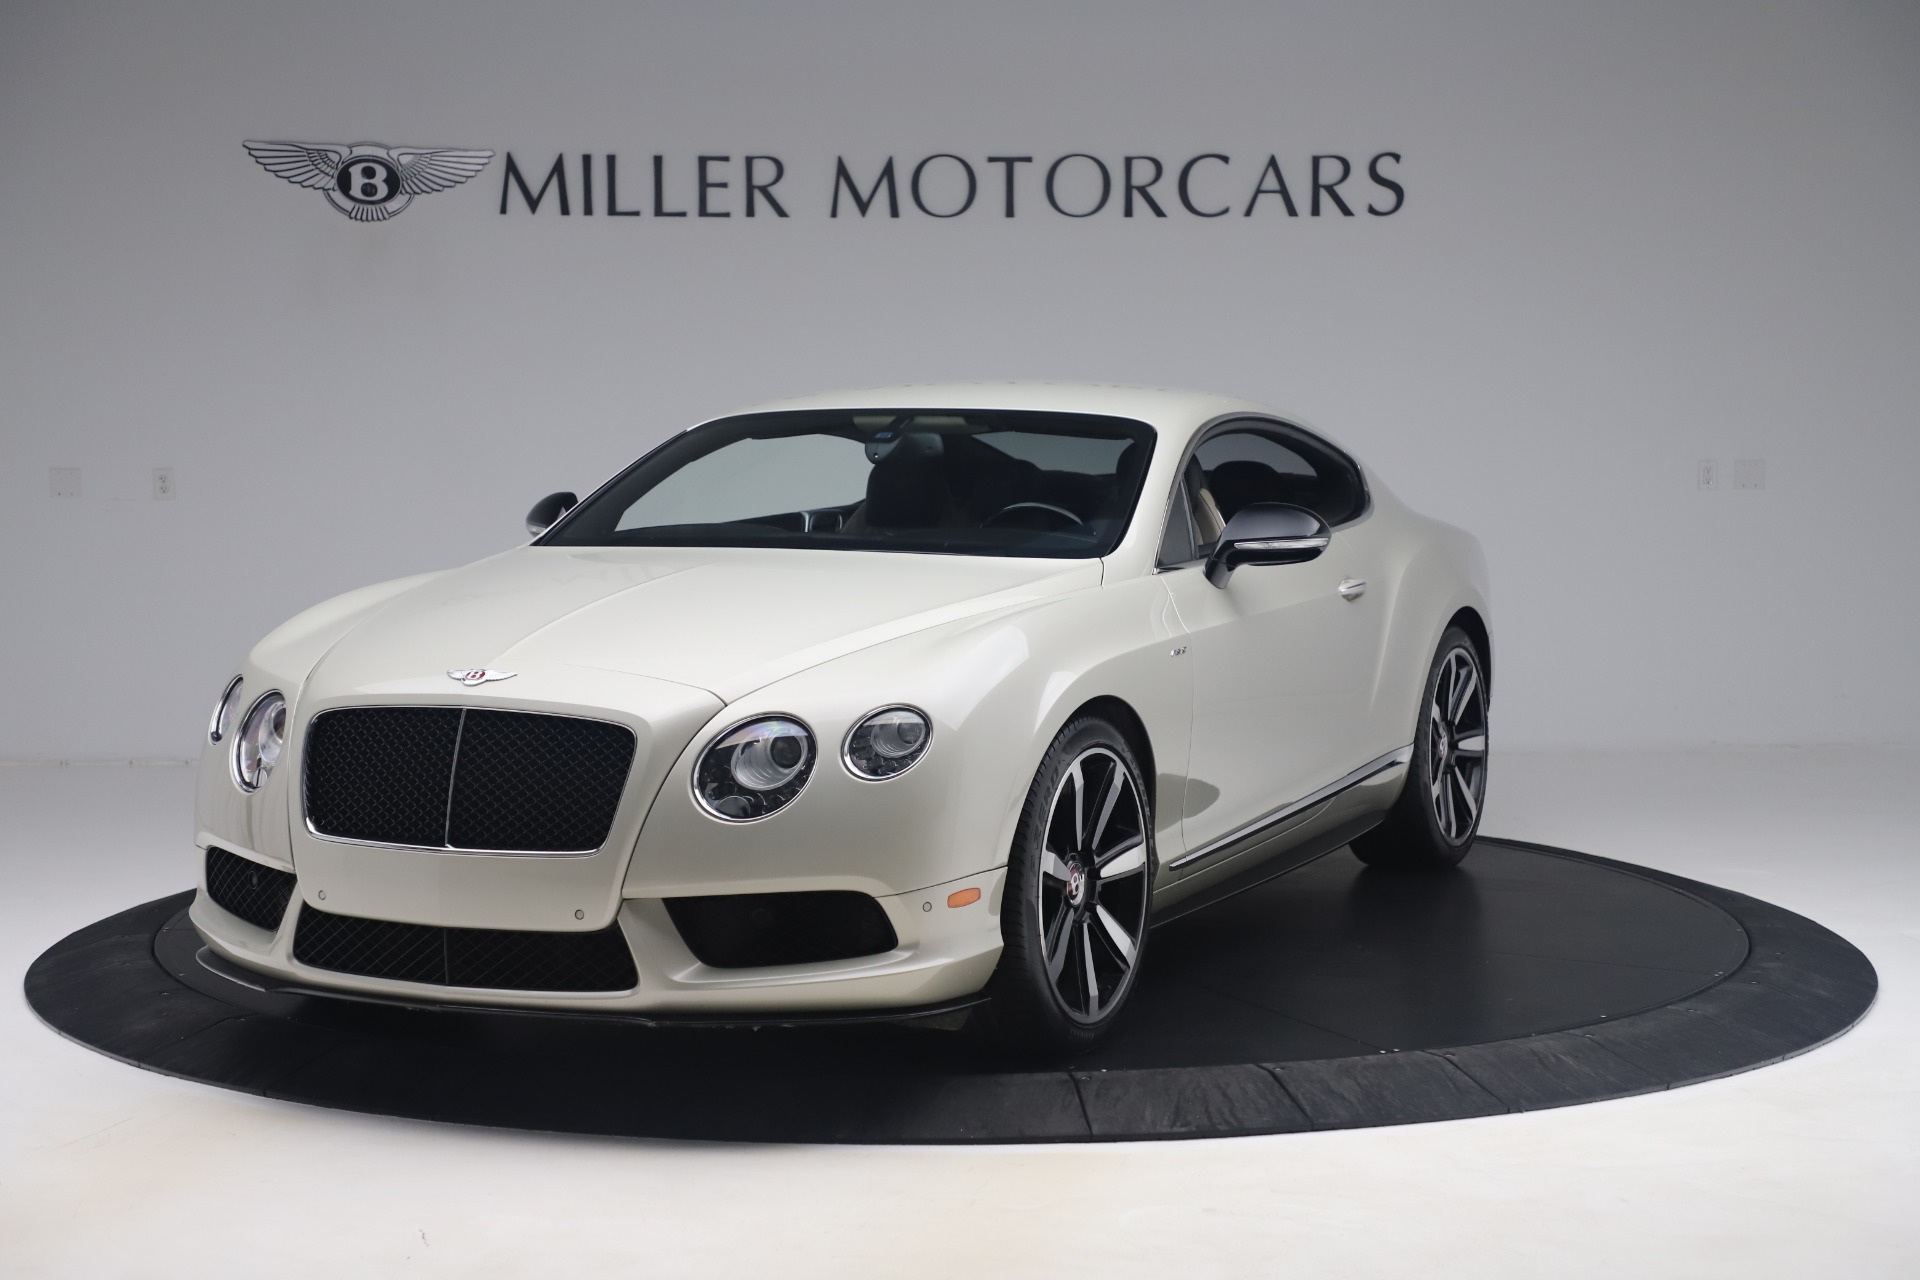 Pre Owned 14 Bentley Continental Gt V8 S For Sale Miller Motorcars Stock 7680